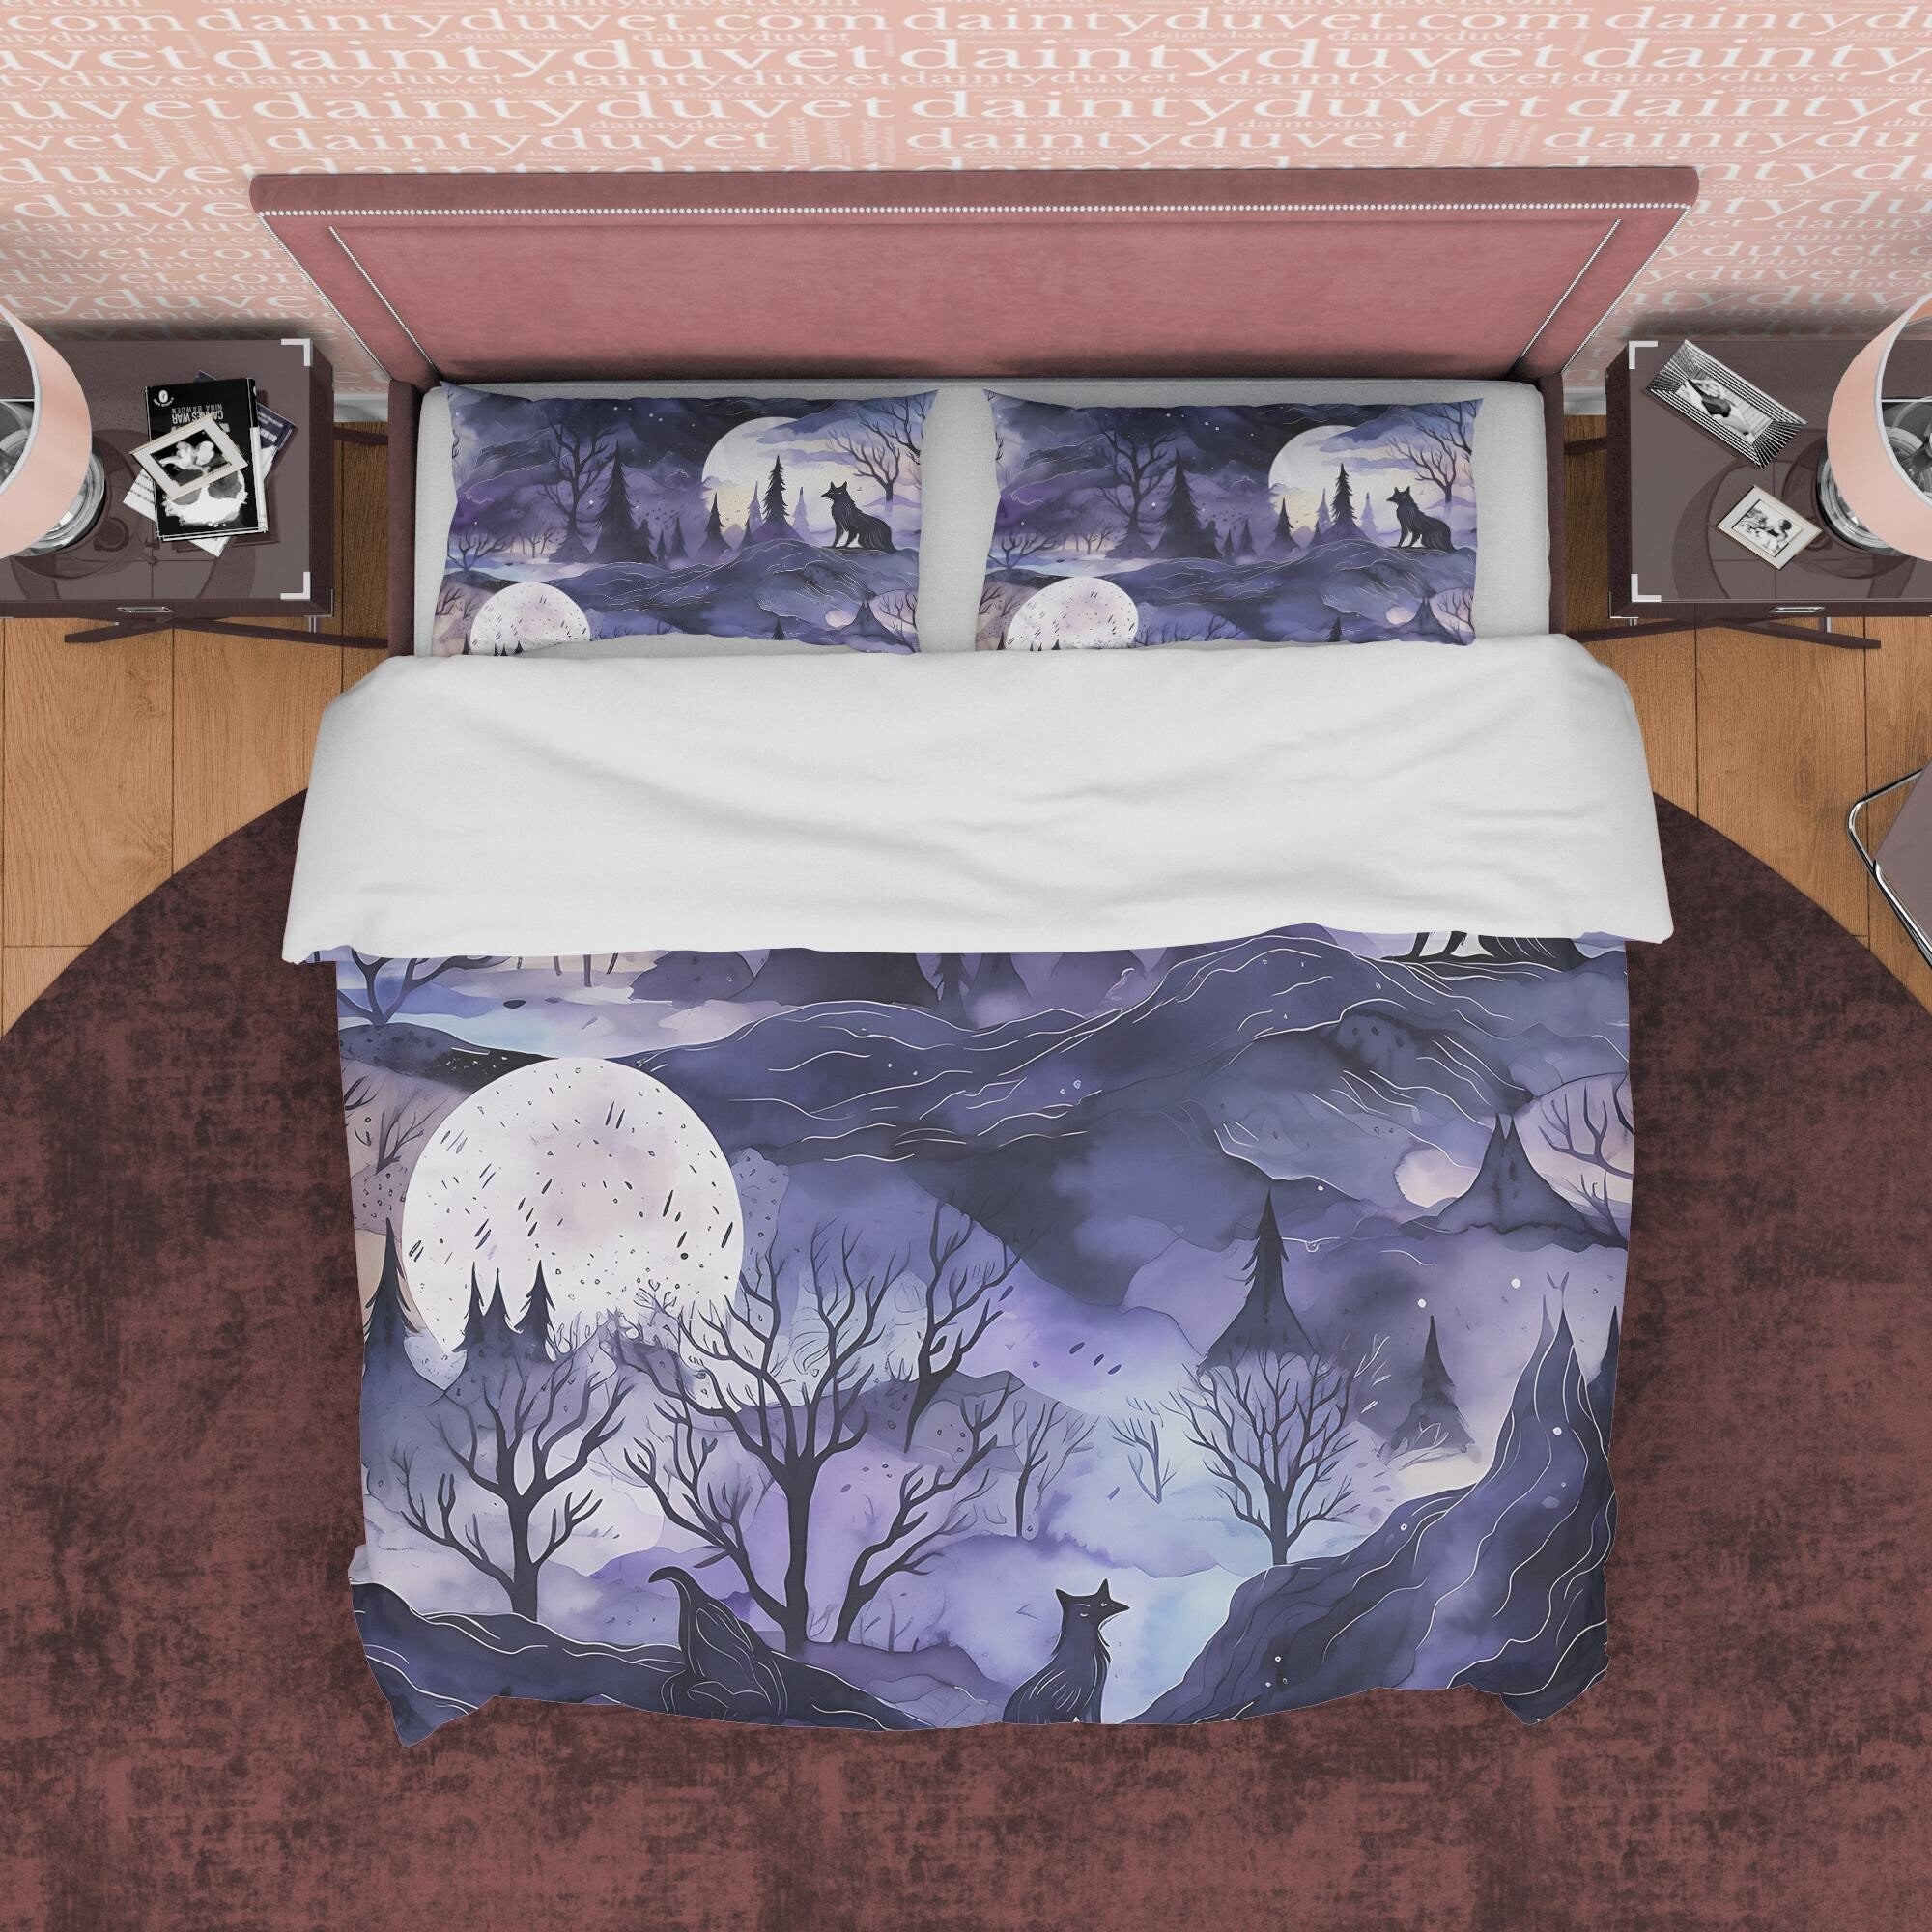 Full Moon Scary Midnight Duvet Cover Set, Haunted Forest Quilt Cover Aesthetic Zipper Bedding, Halloween Room Decor, Purple Blanket Cover